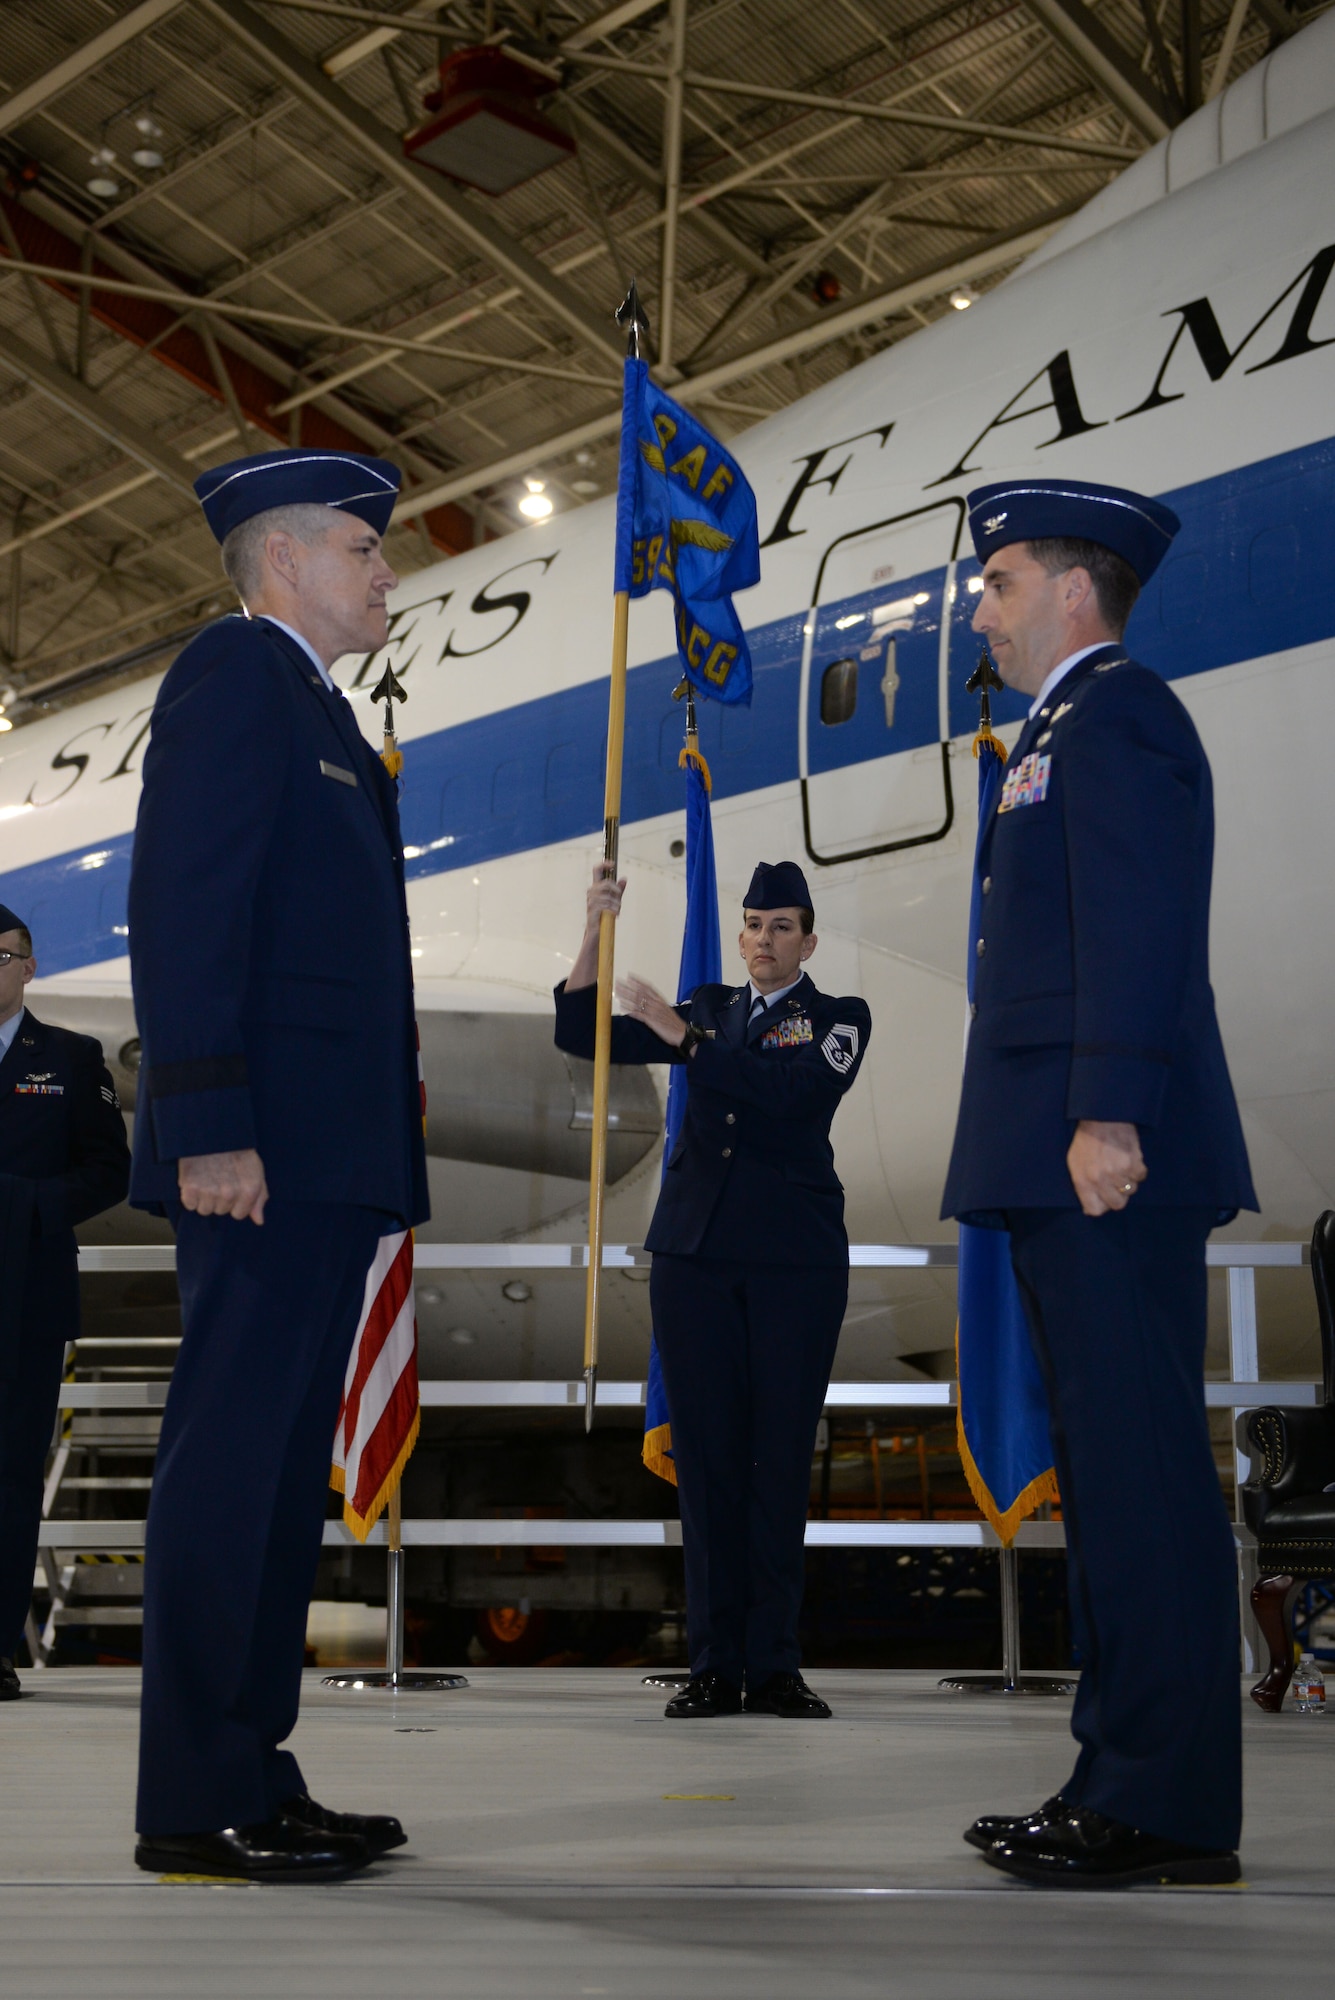 U.S. Col Robert Billings, right, prepares to accept the 595th Command and Control Group flag from Maj. Gen. Thomas Bussiere, Eighth Air Force commander, left, signifying his acceptance to command the group. The 595th CACG was activated during the E-4B realignment ceremony at Offutt Air Force Base, Neb., Oct. 7, as part of an initiative to house all Air Force nuclear assets under Air Force Global Strike Command. (U.S. Air Force photo by )